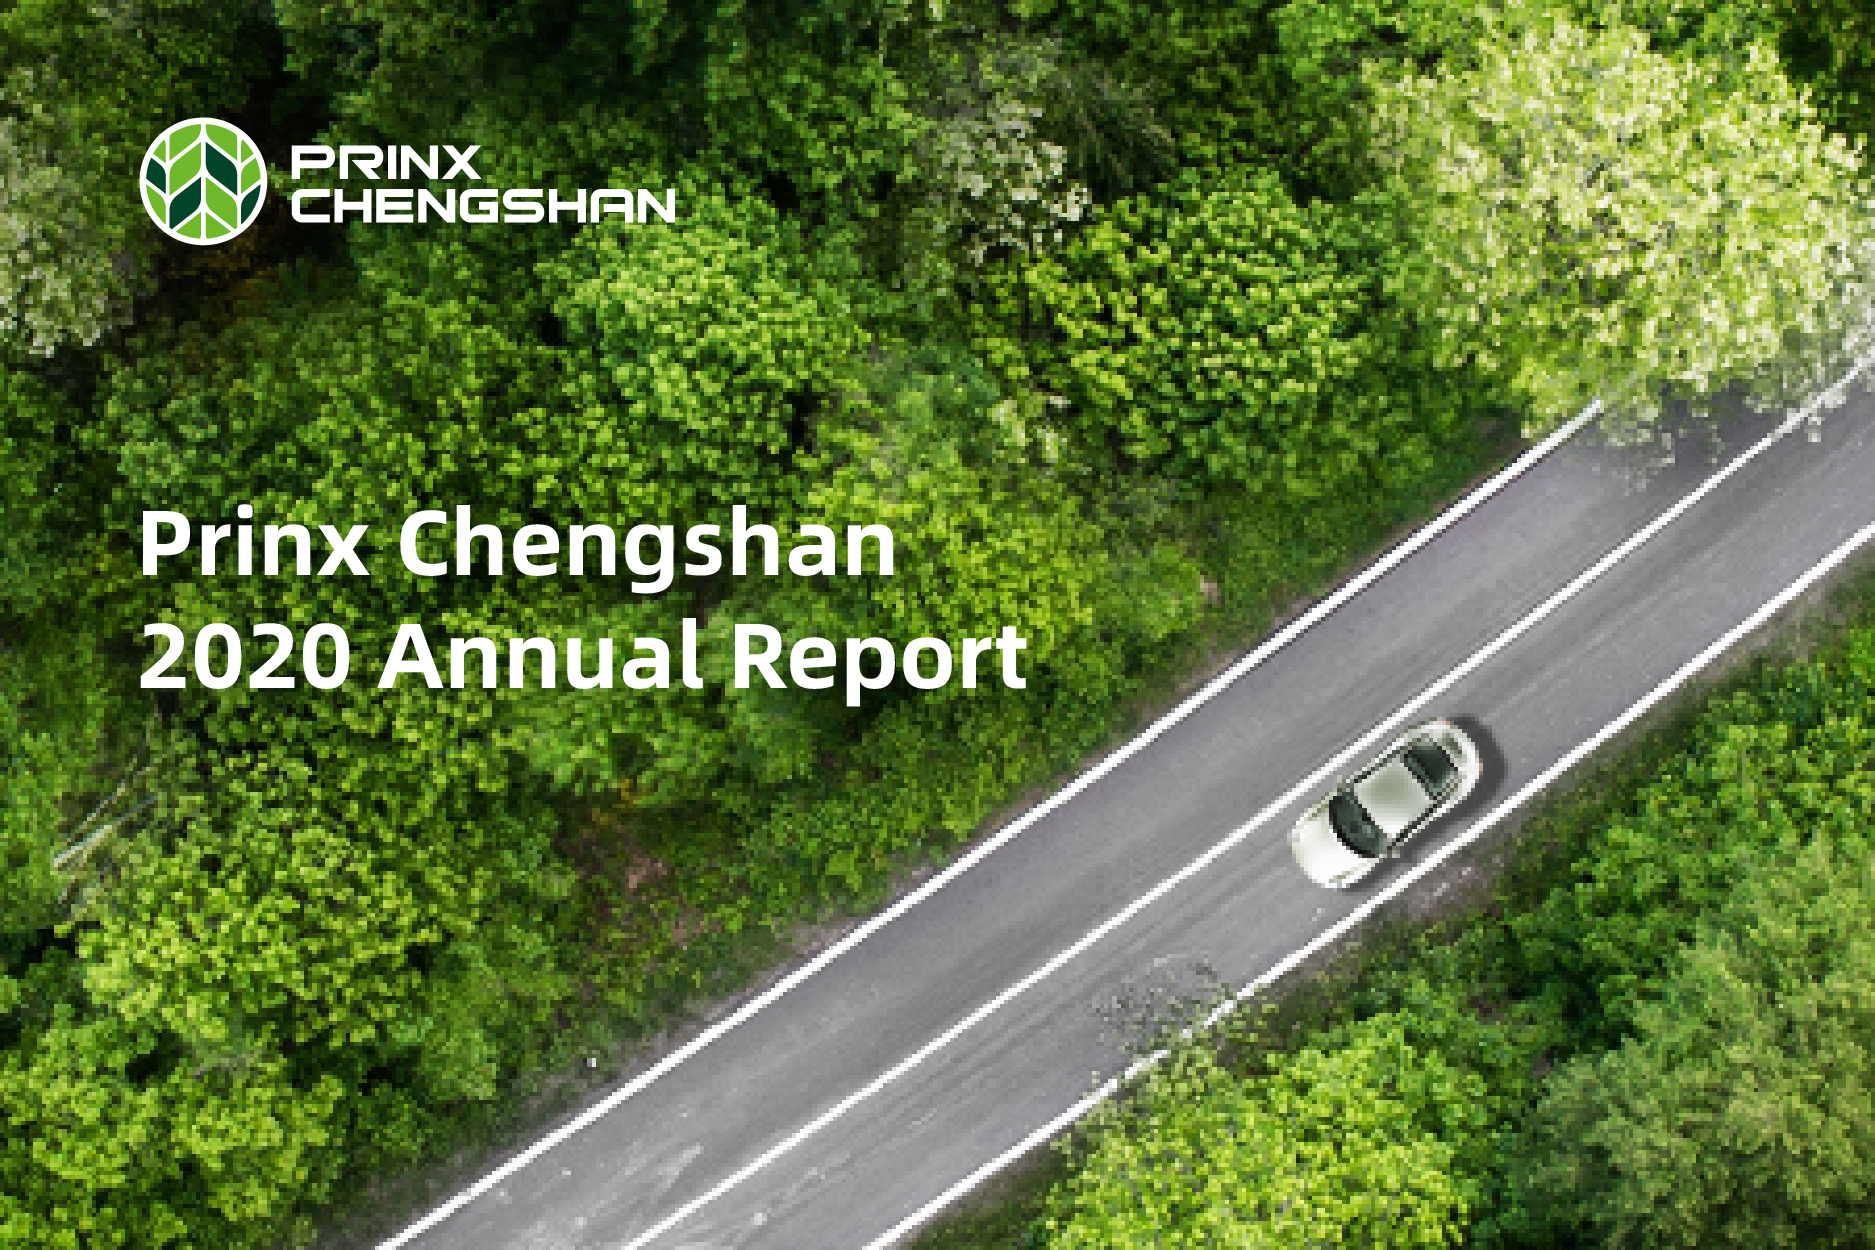 Prinx Chengshan Announces 2020 Annual Results